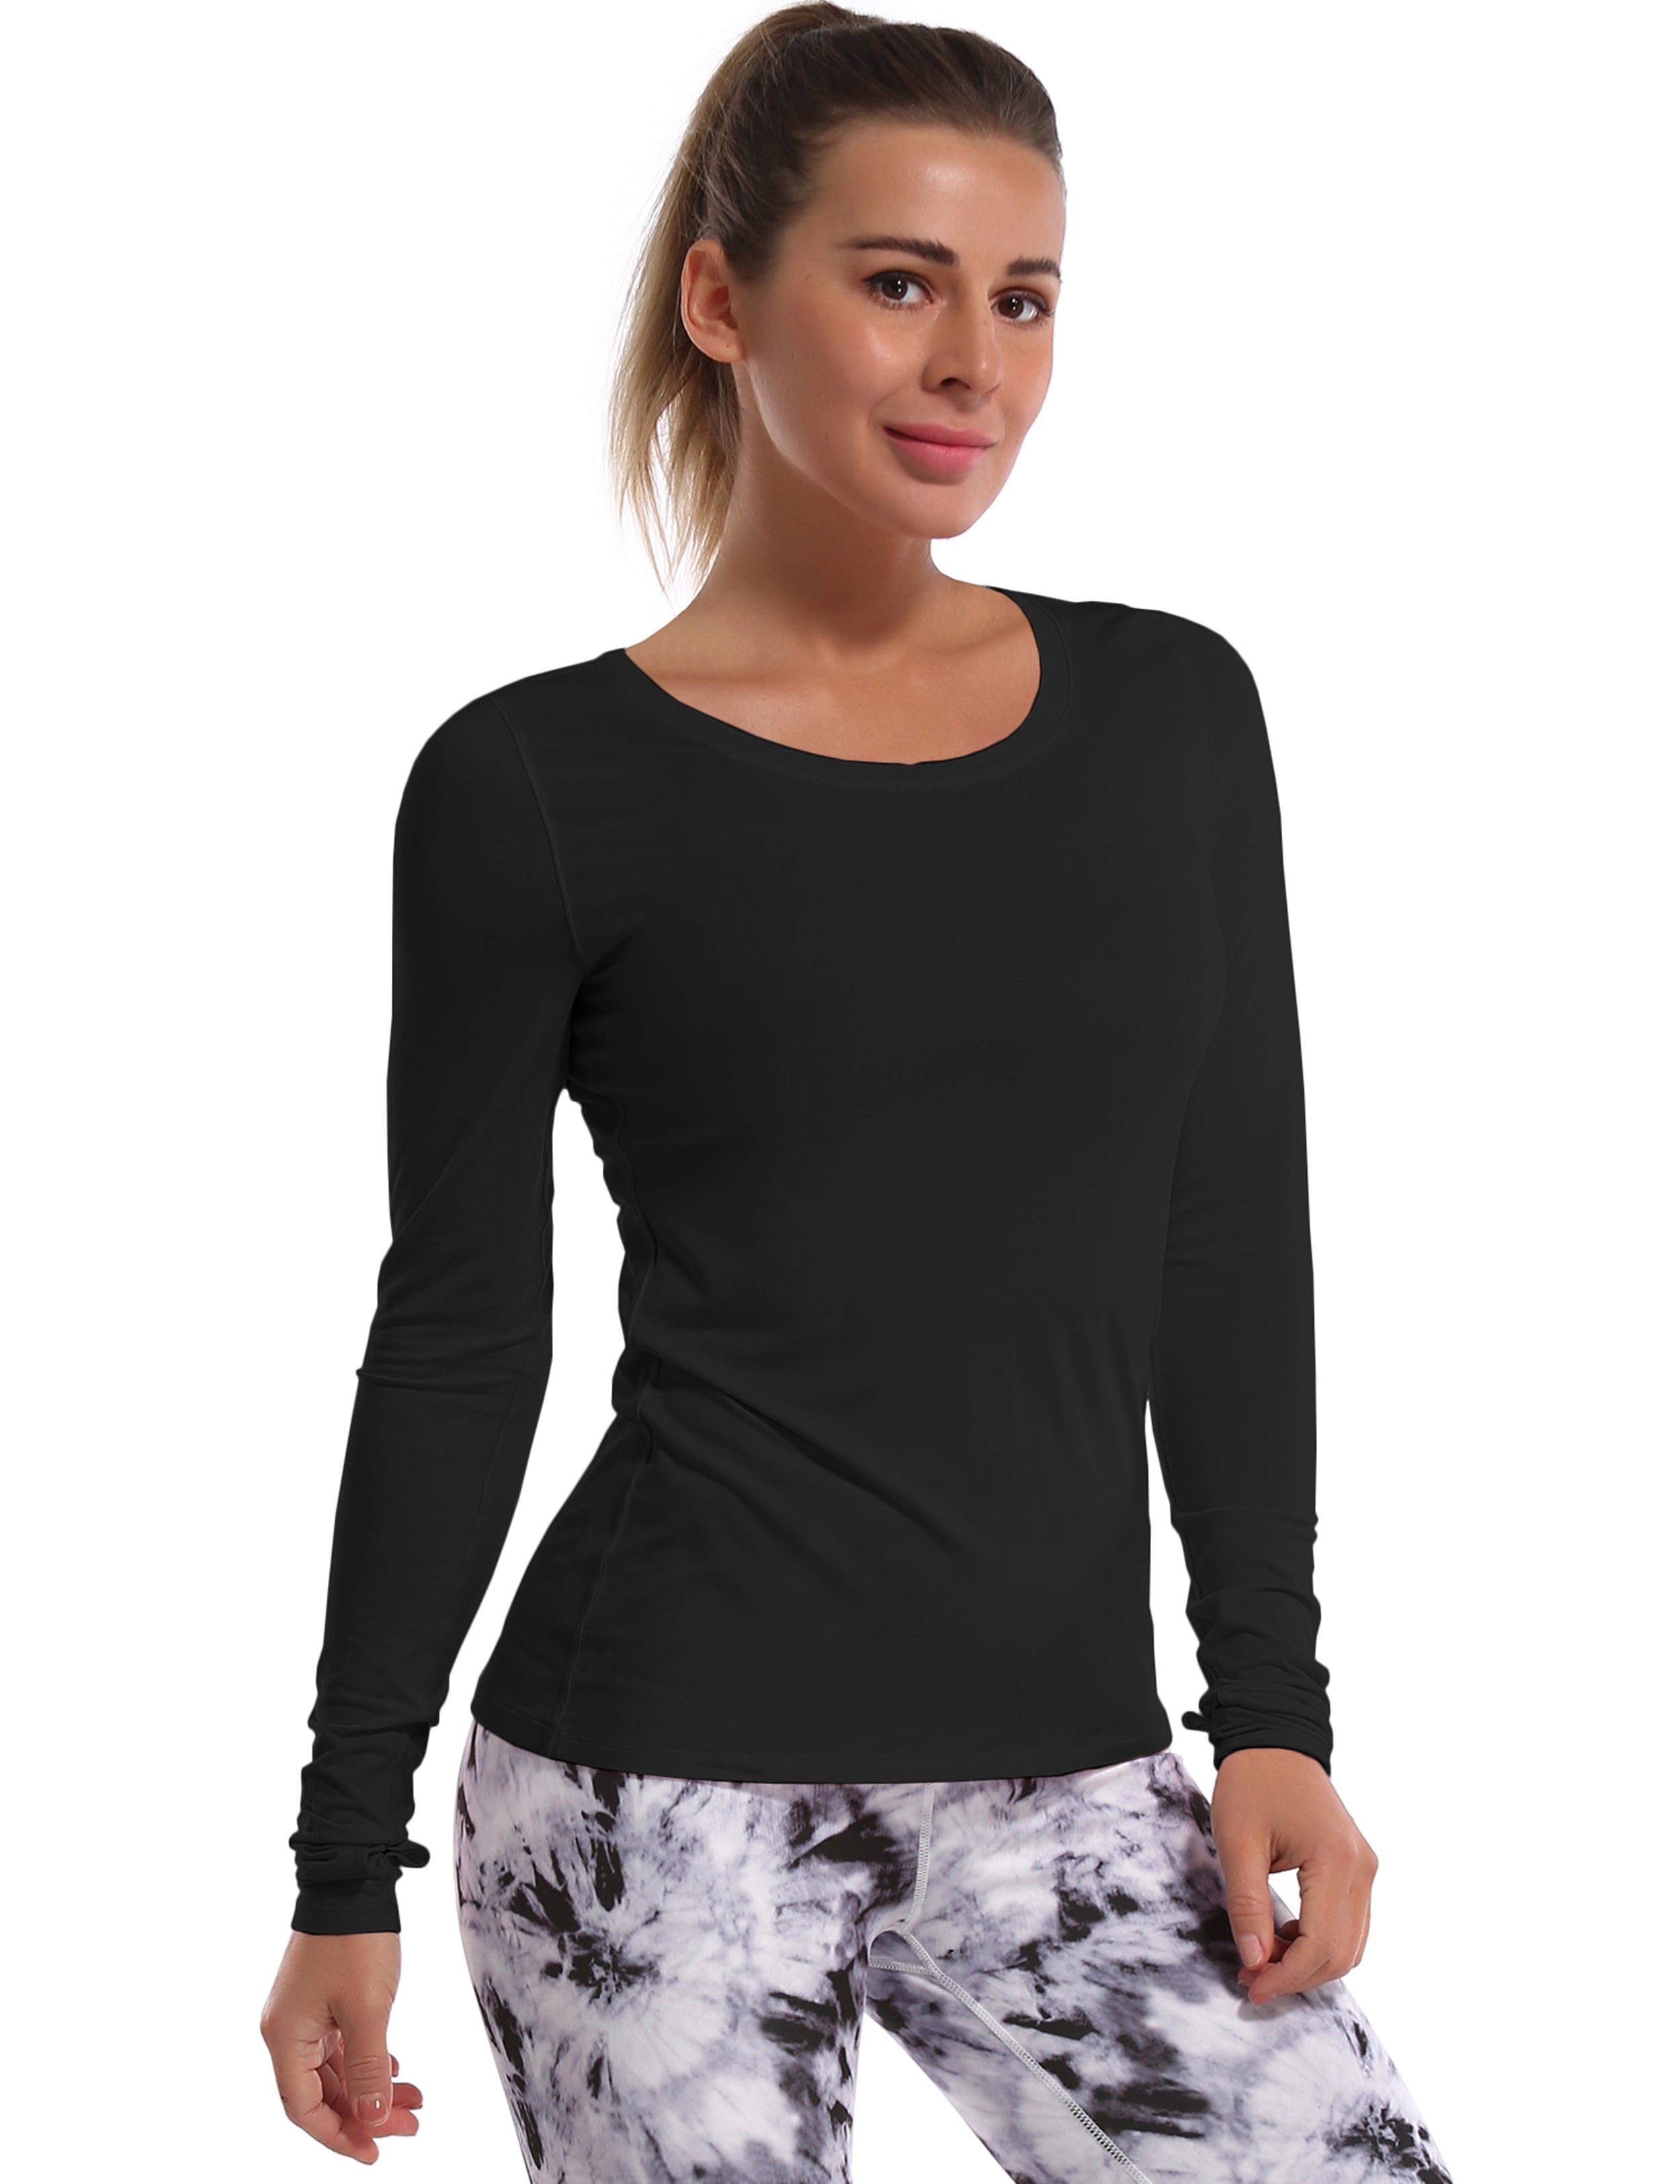 Athlete Long Sleeve Tops black Designed for On the Move Slim fit 93%Modal/7%Spandex Four-way stretch Naturally breathable Super-Soft, Modal Fabric